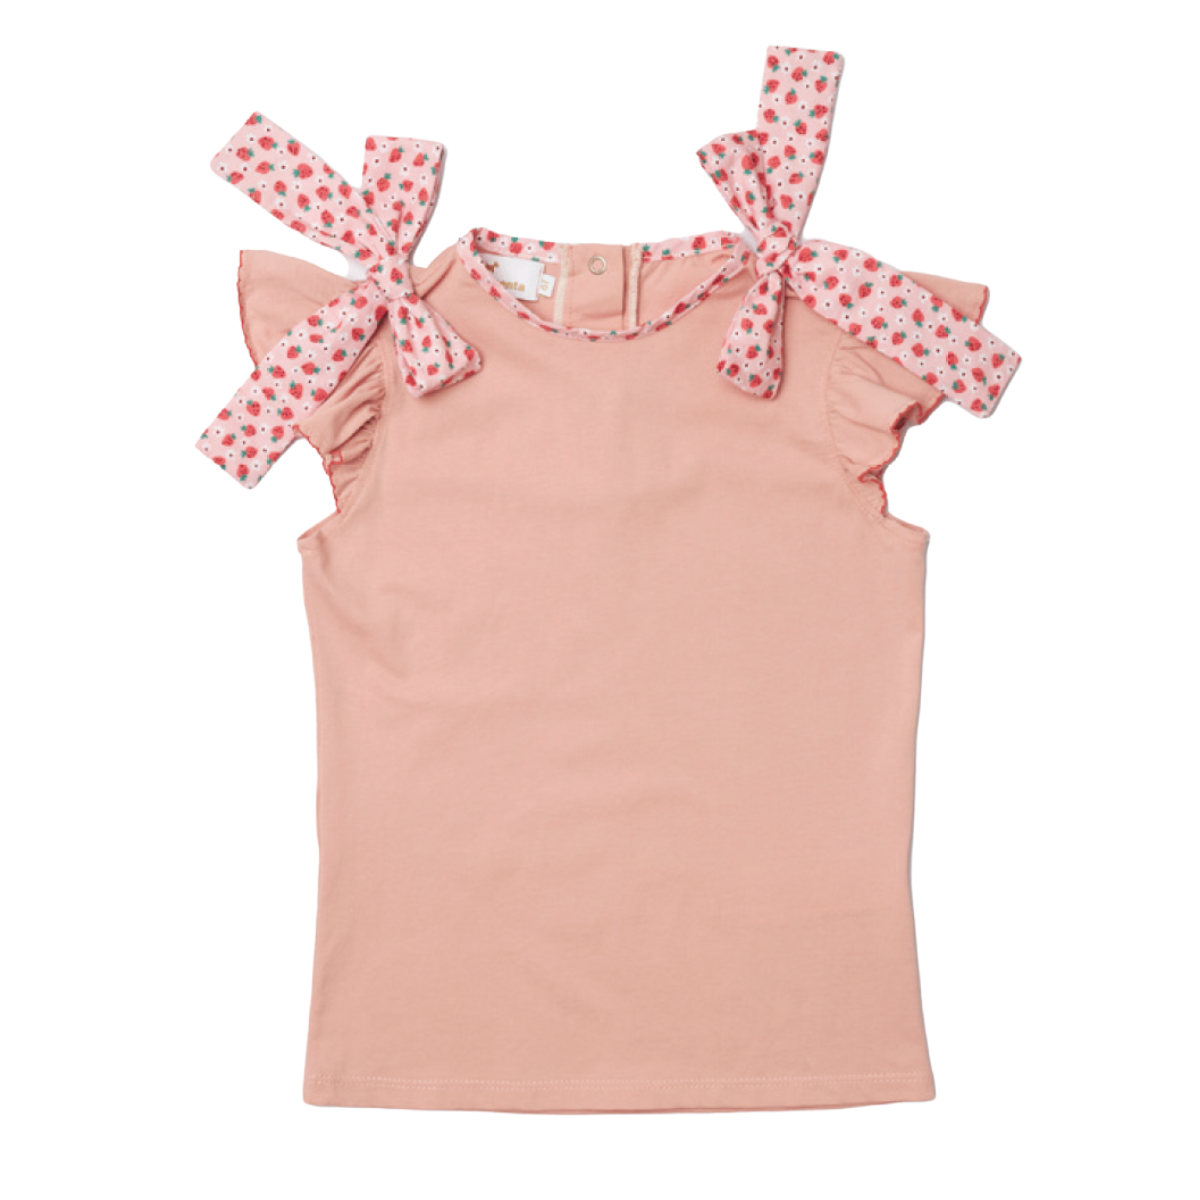 Blush pink top with strawberry ties on shoulder by Sal & Pimenta. 